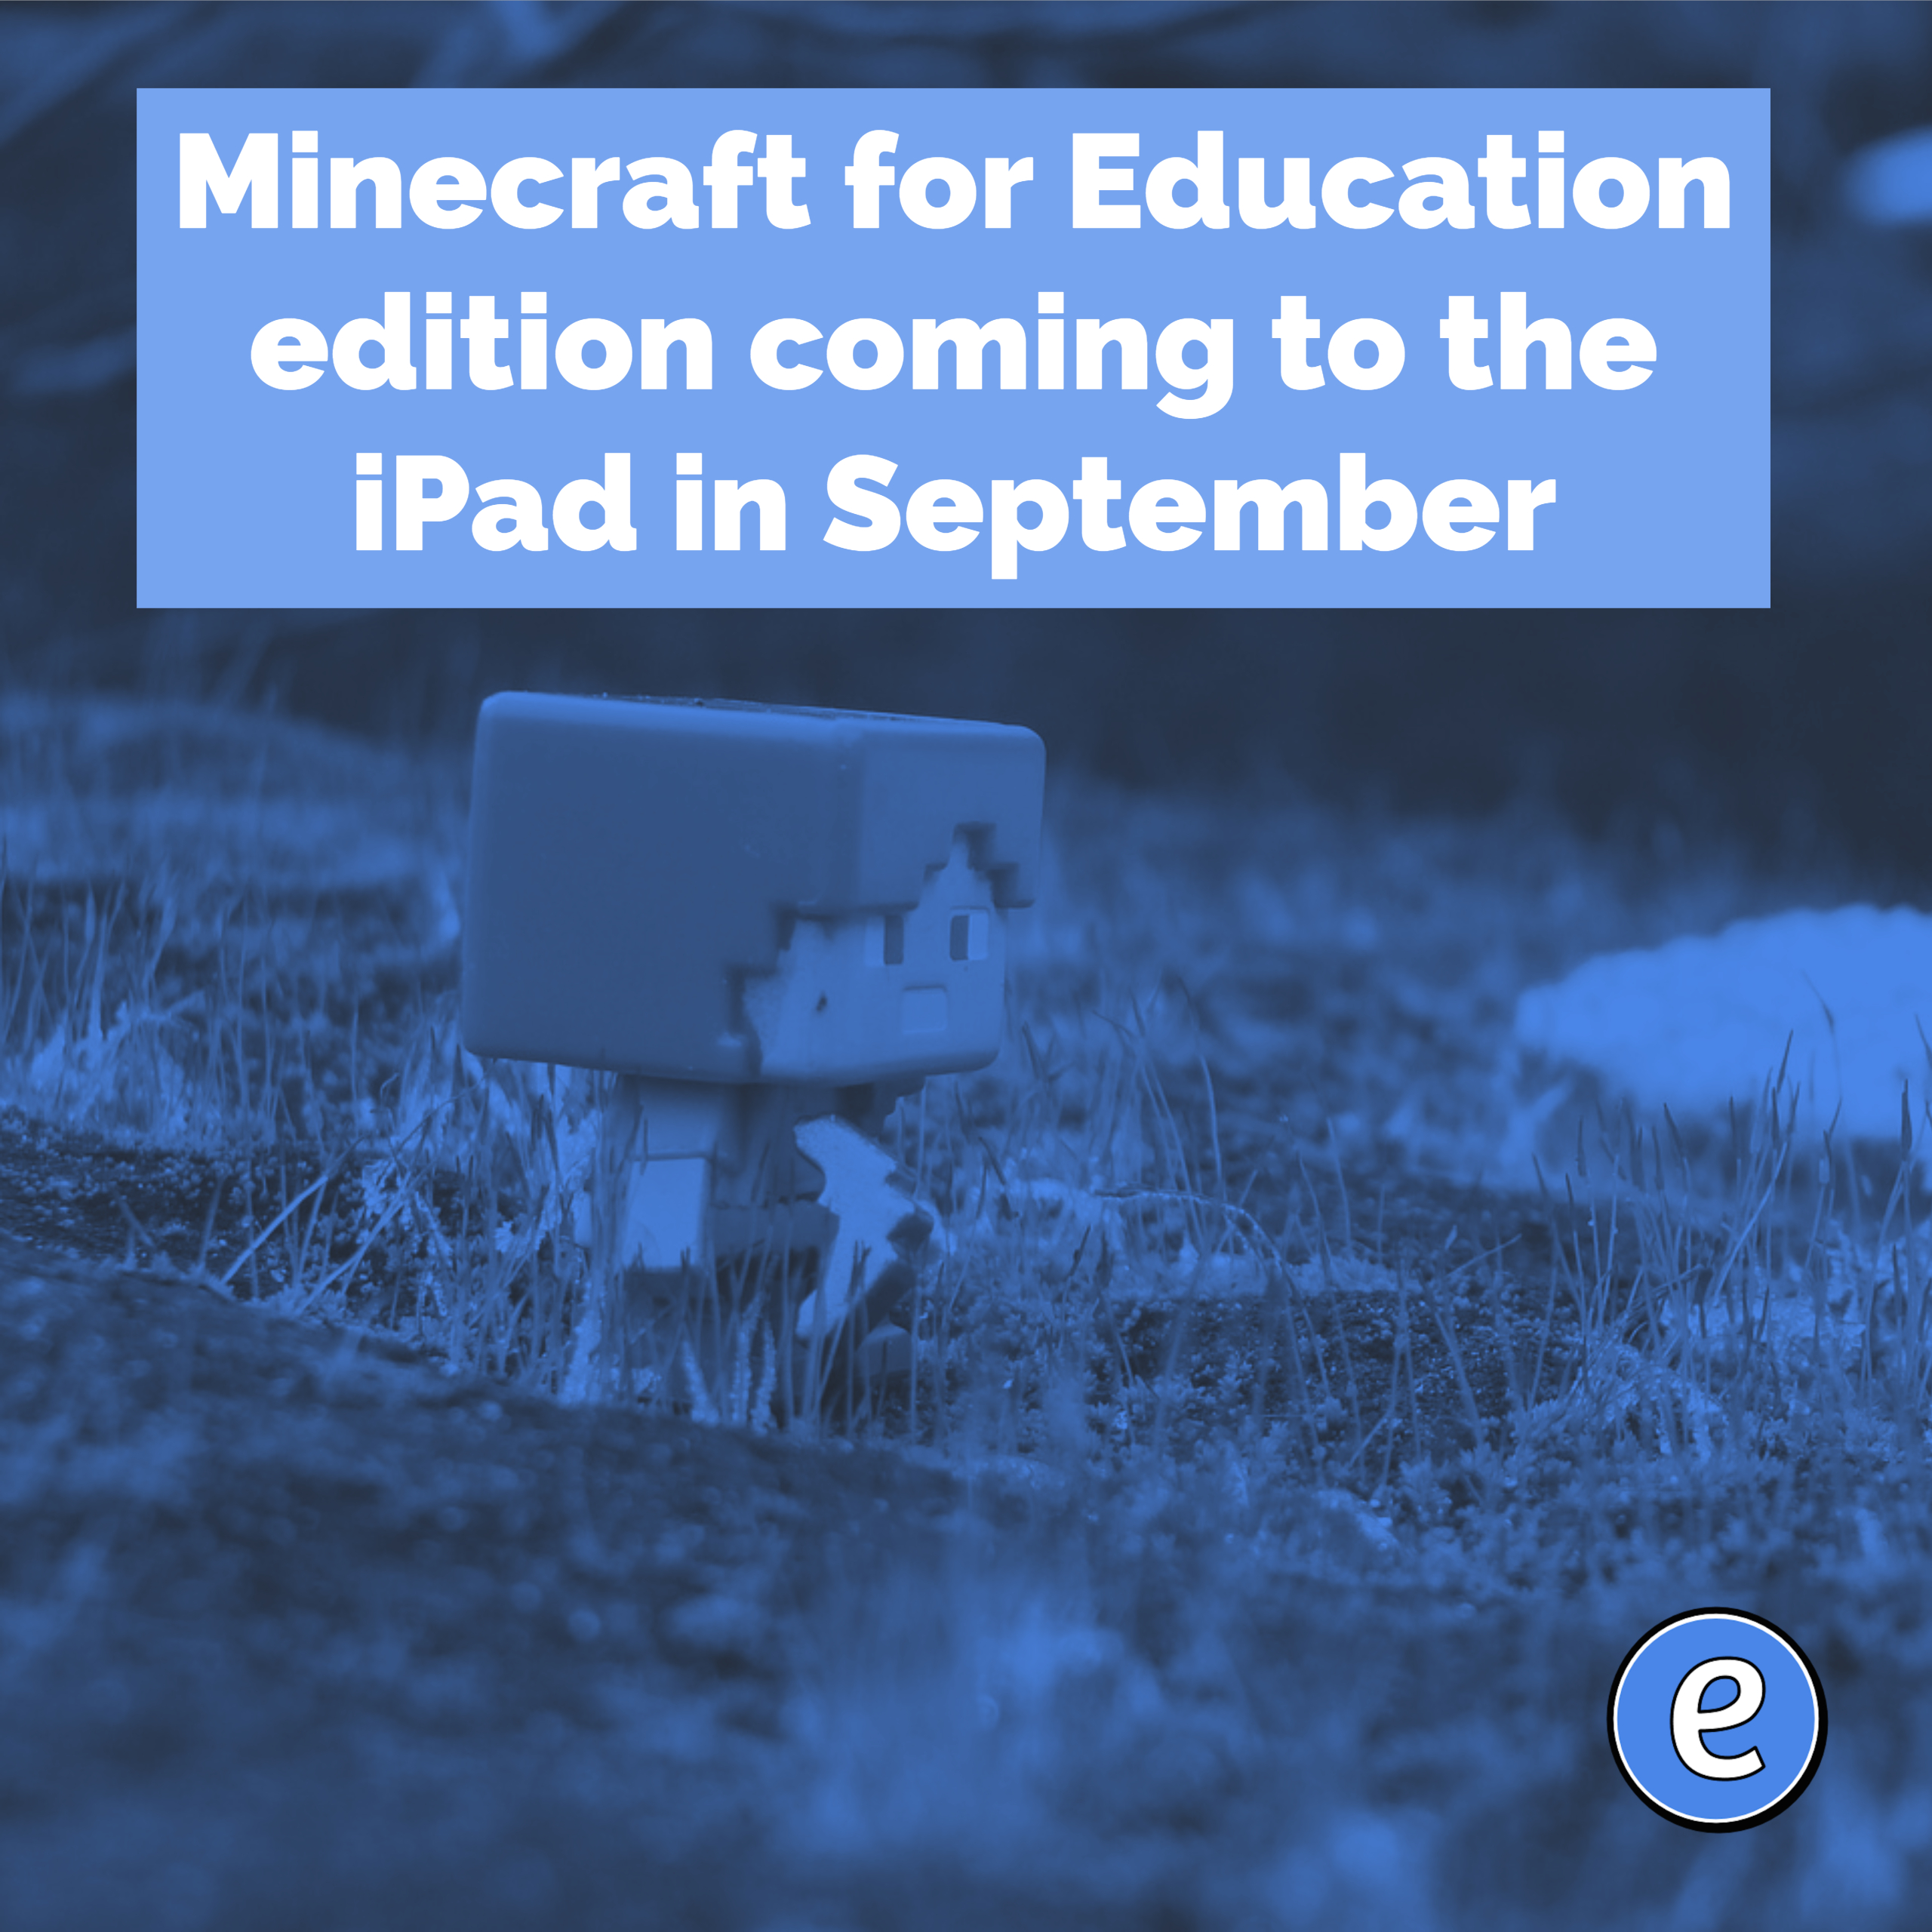 Minecraft for Education edition coming to the iPad in September